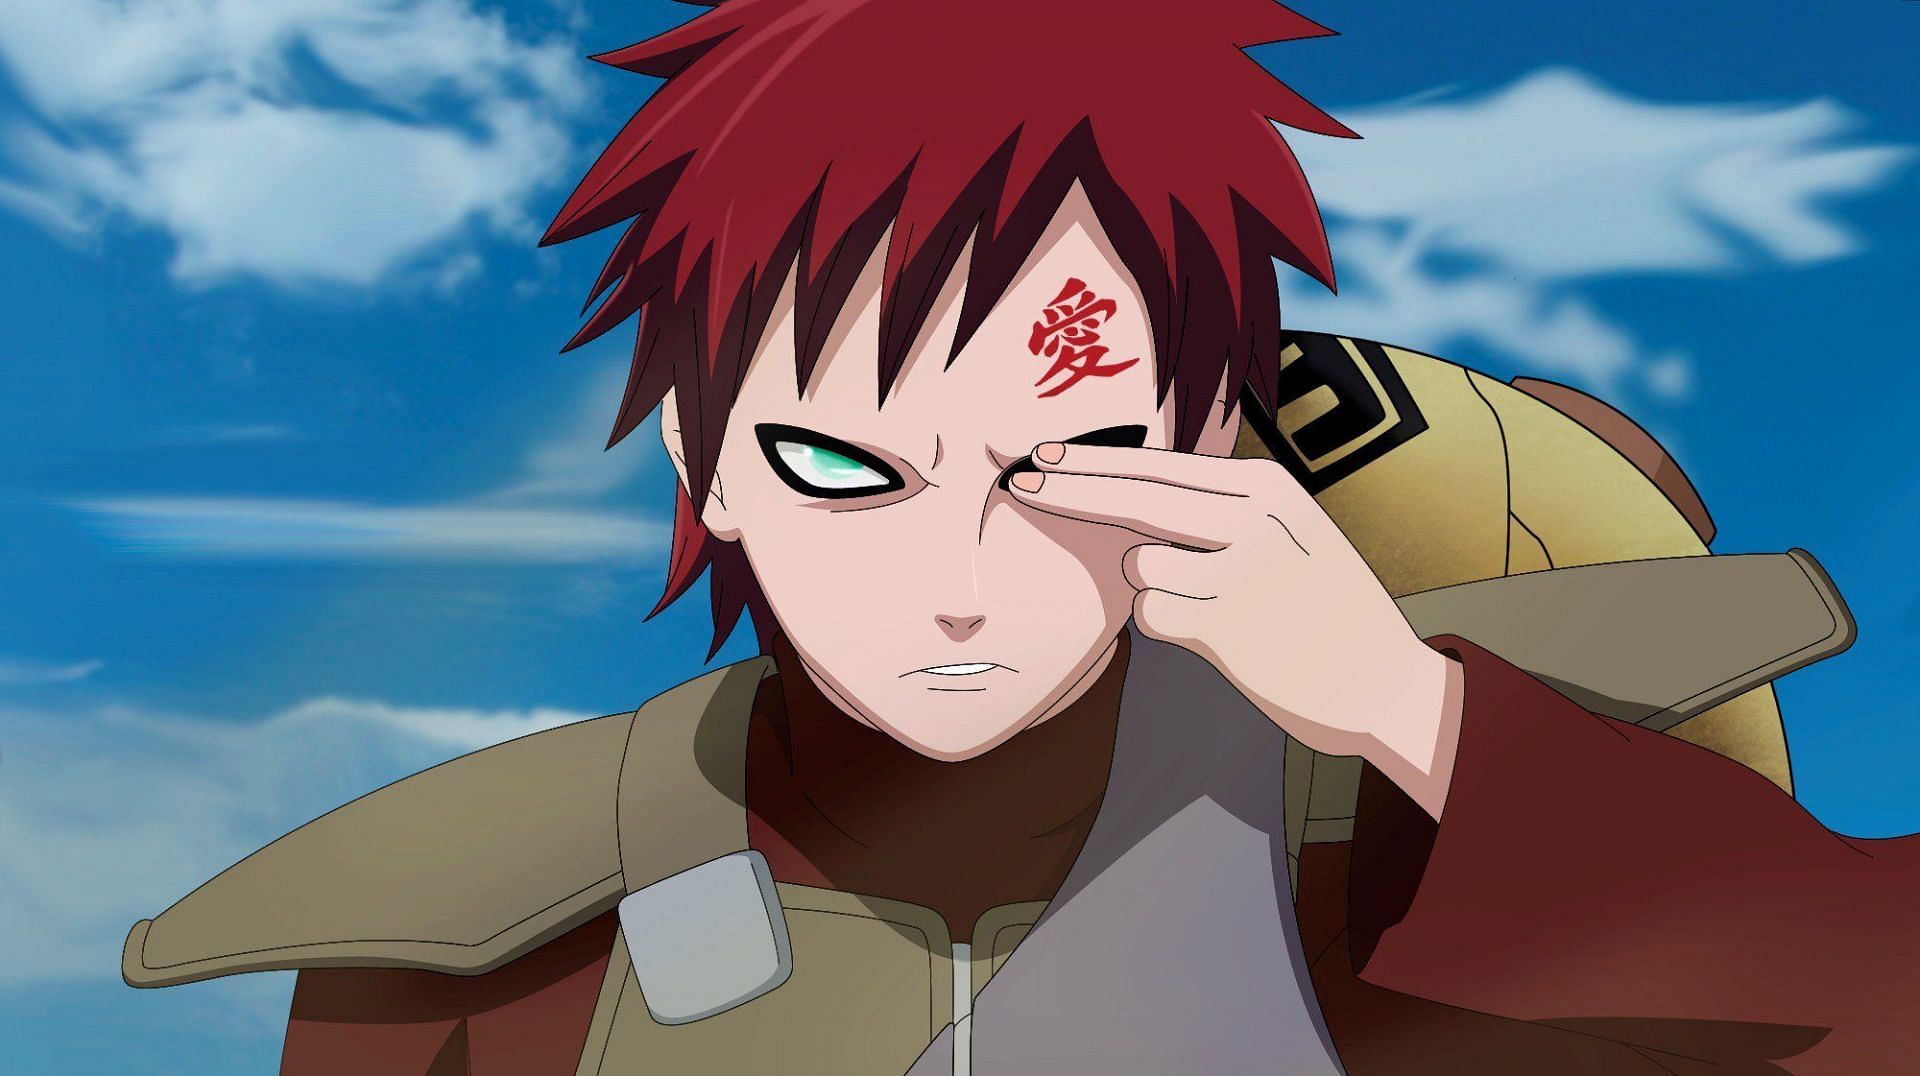 Comparison between Gaara and some of the characters in the series (Image via Pierrot)